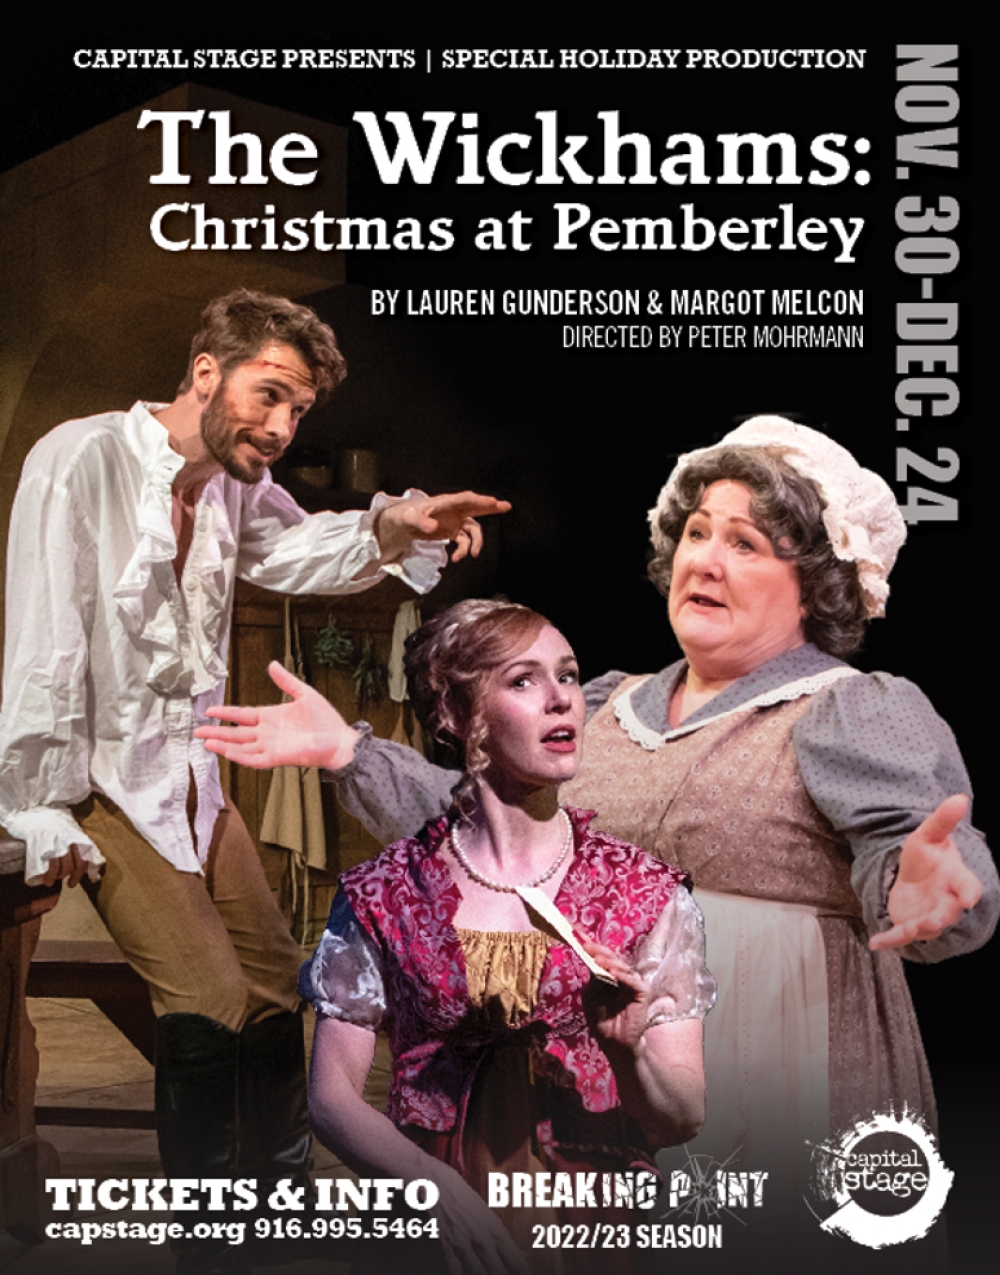 THE WICKHAMS: CHRISTMAS AT PEMBERLEY - Capital Stage Stage Mag